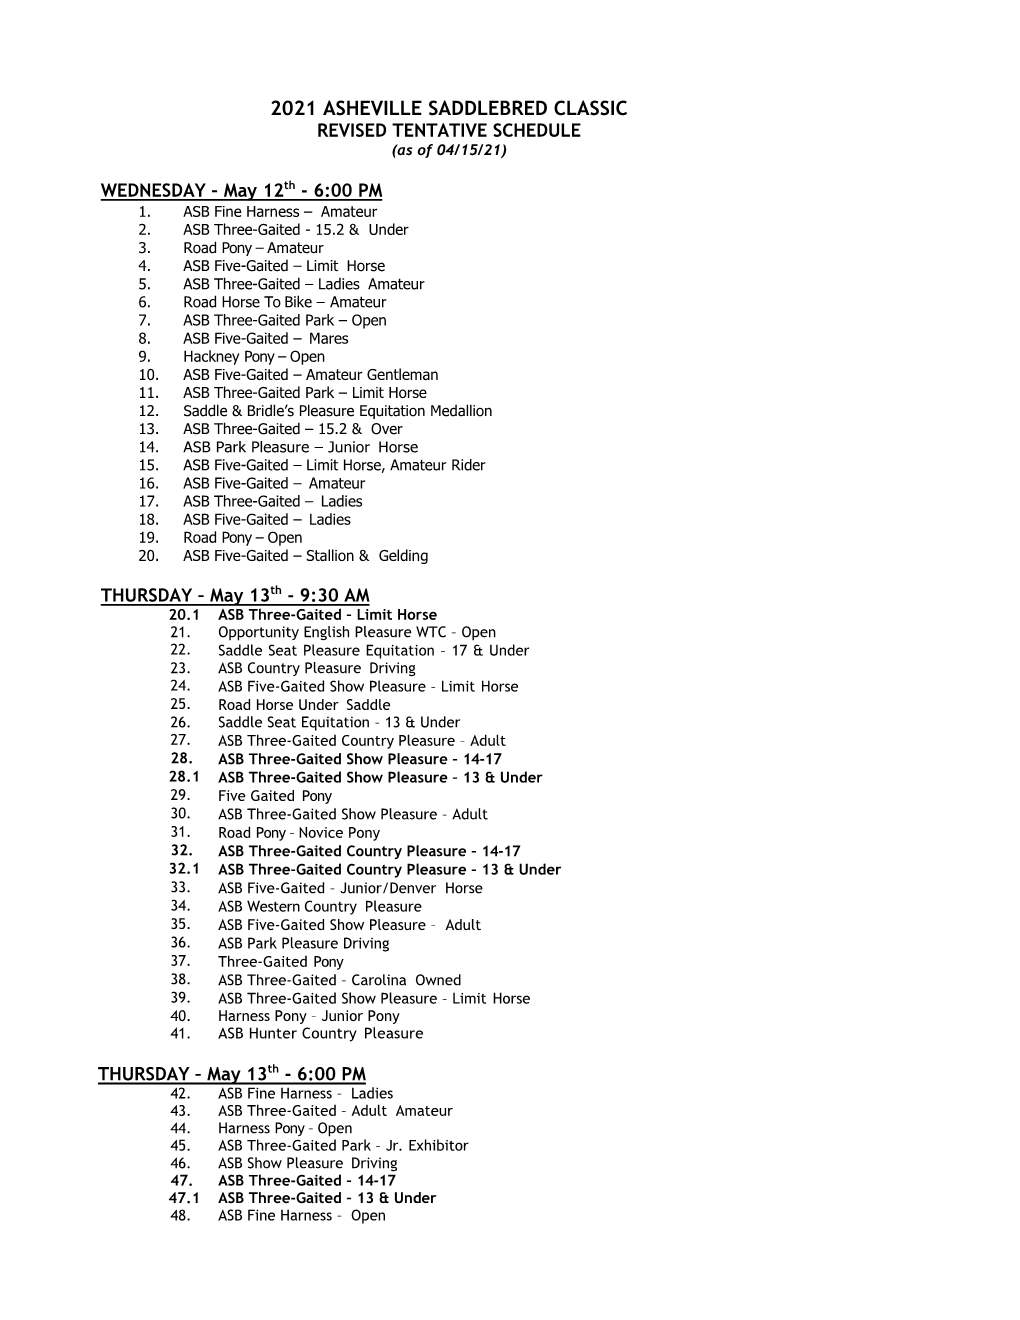 2021 ASHEVILLE SADDLEBRED CLASSIC REVISED TENTATIVE SCHEDULE (As of 04/15/21)